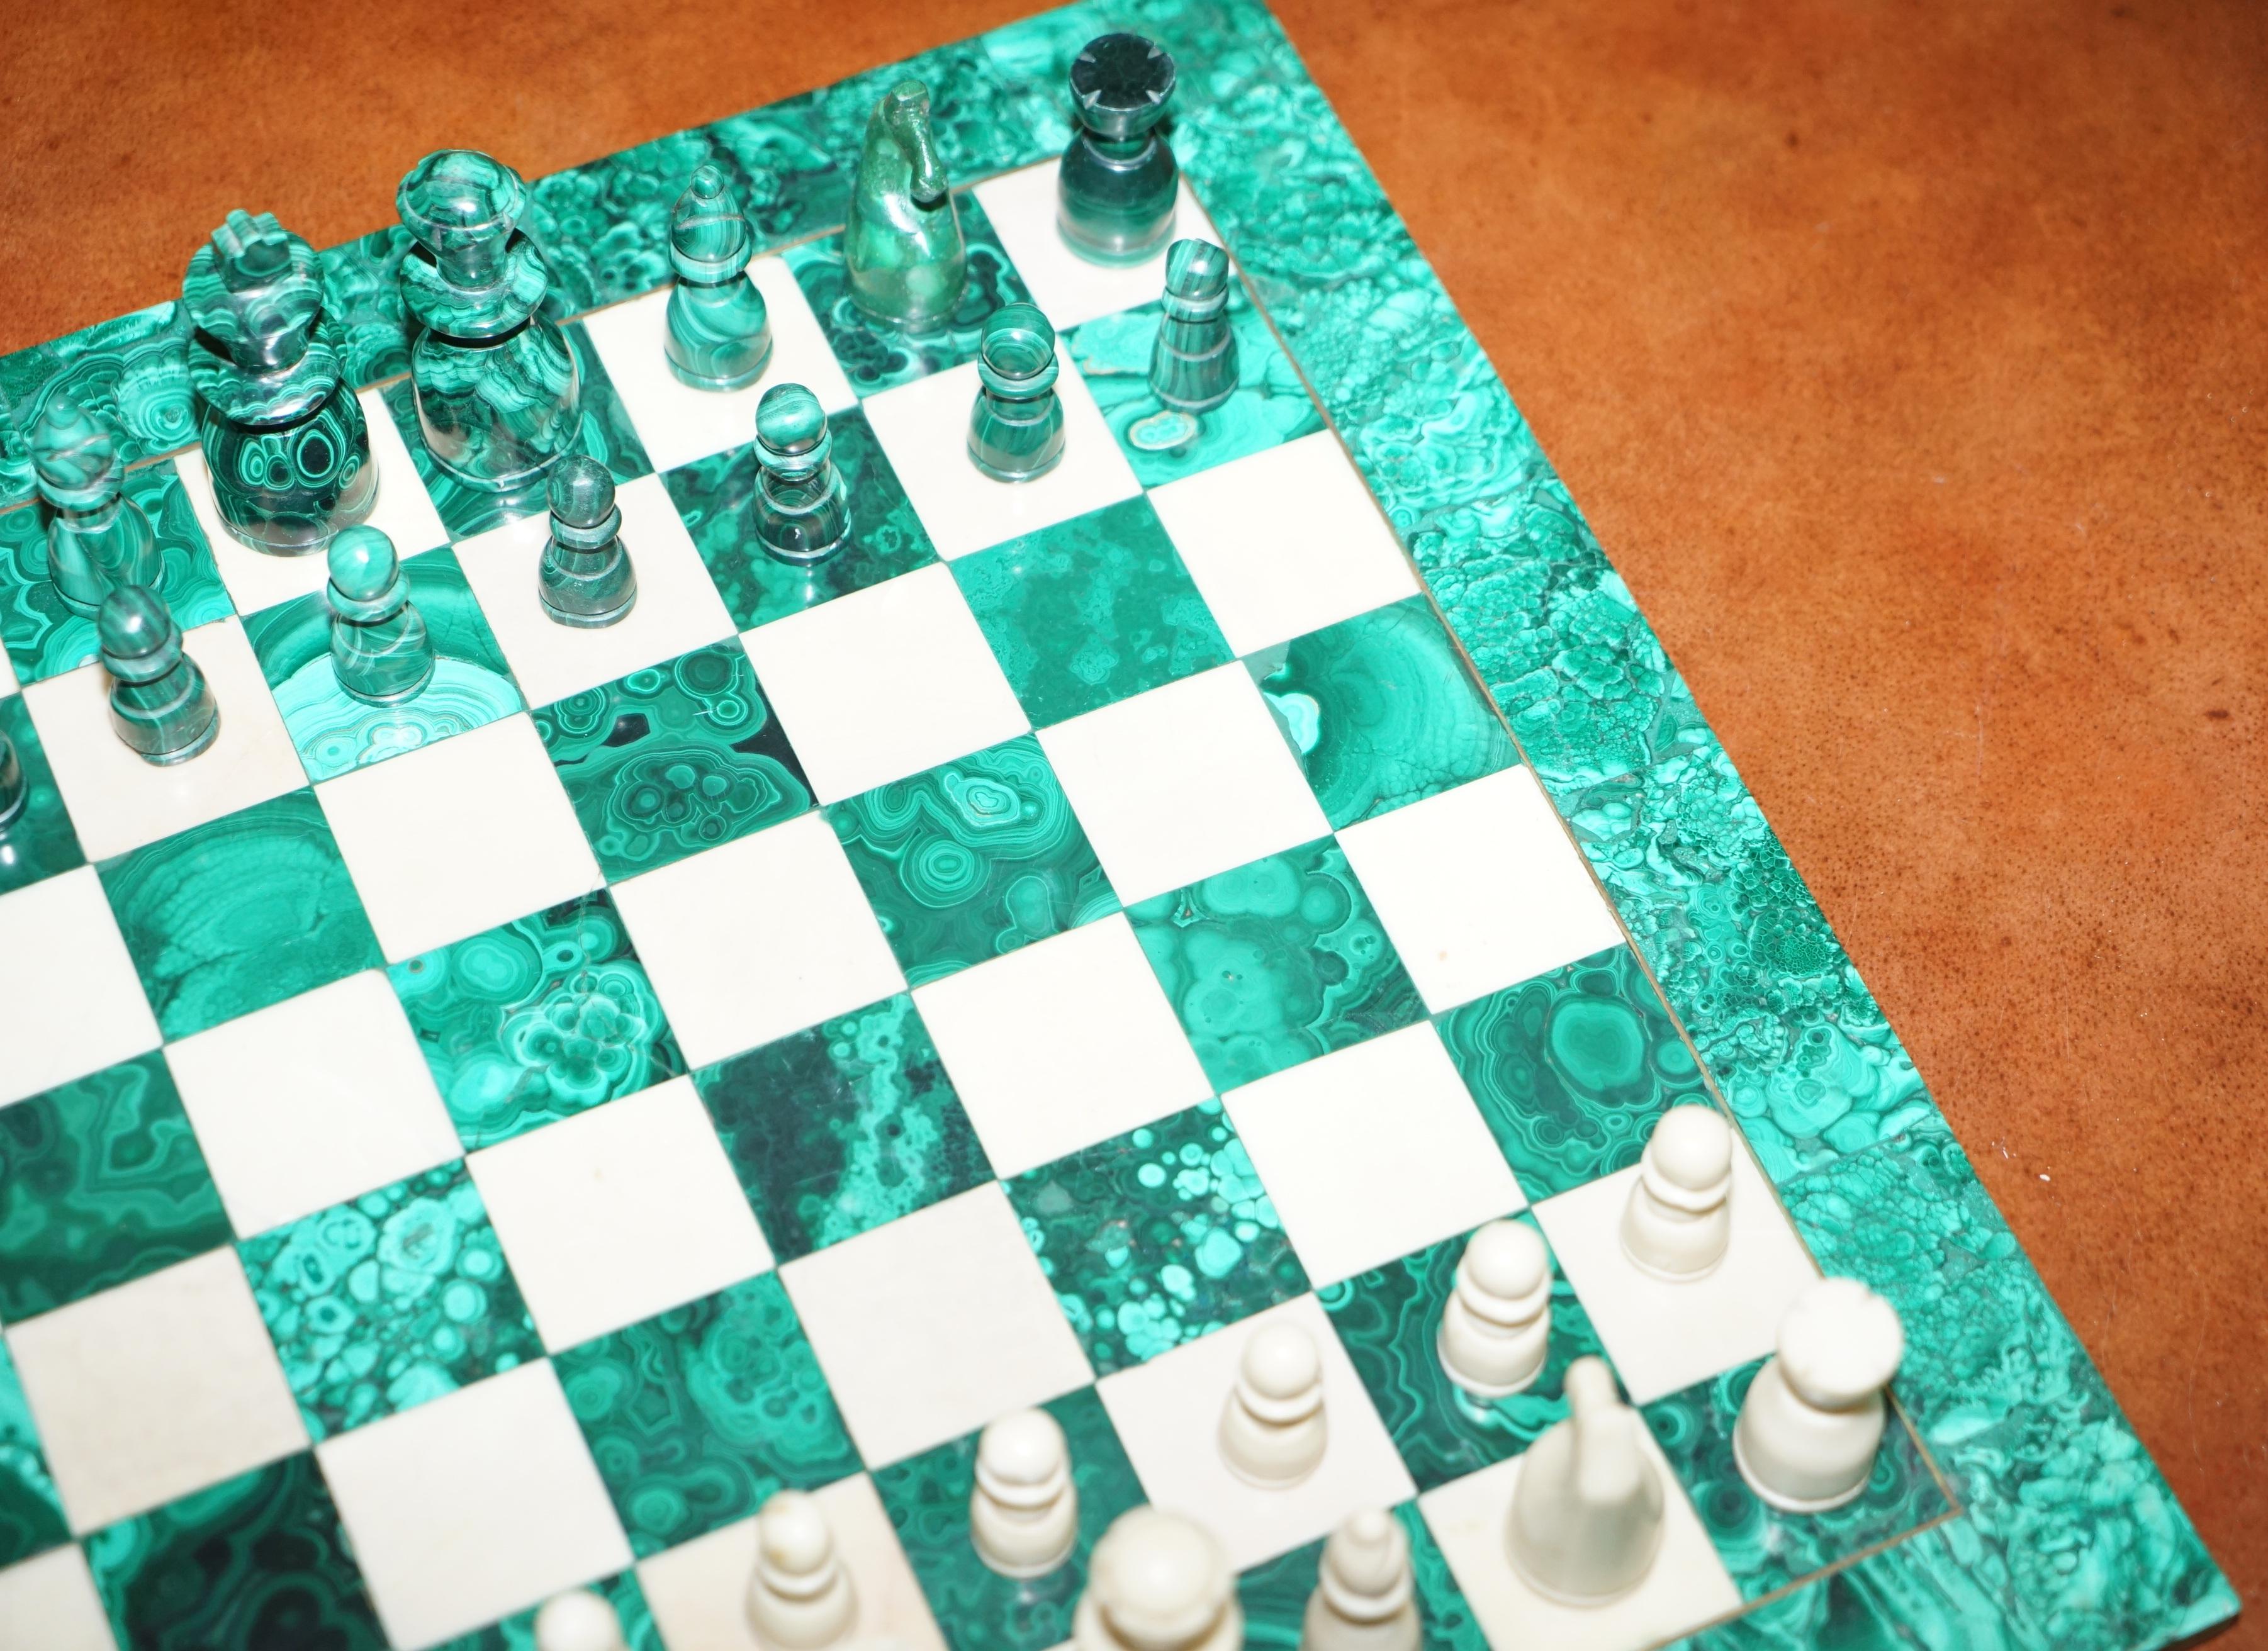 Hand-Crafted Sublime Solid Malachite and Marble Full Sized Chess Set Must See Pictures